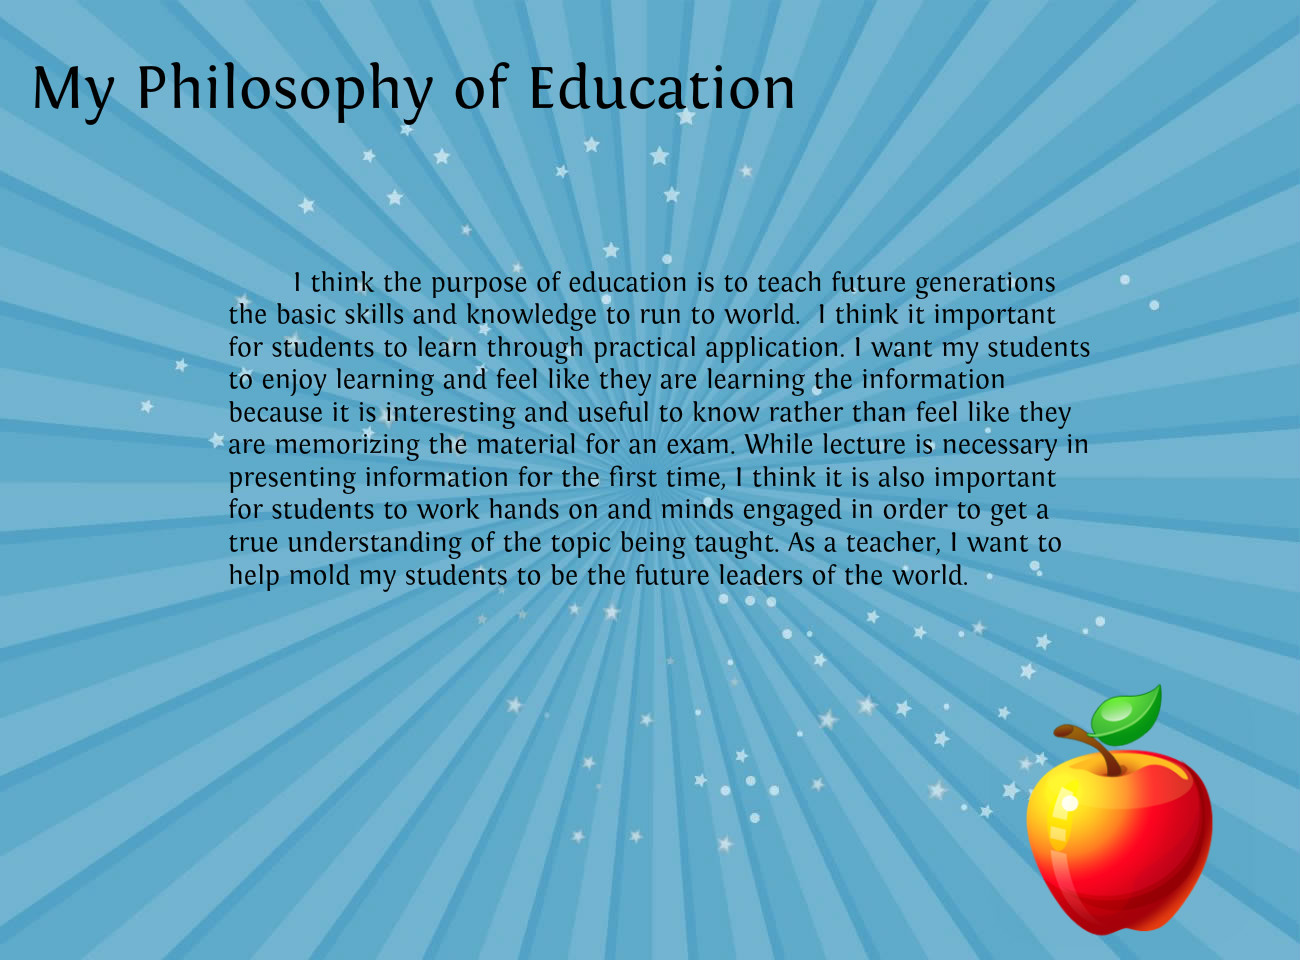 Phiosophy of education